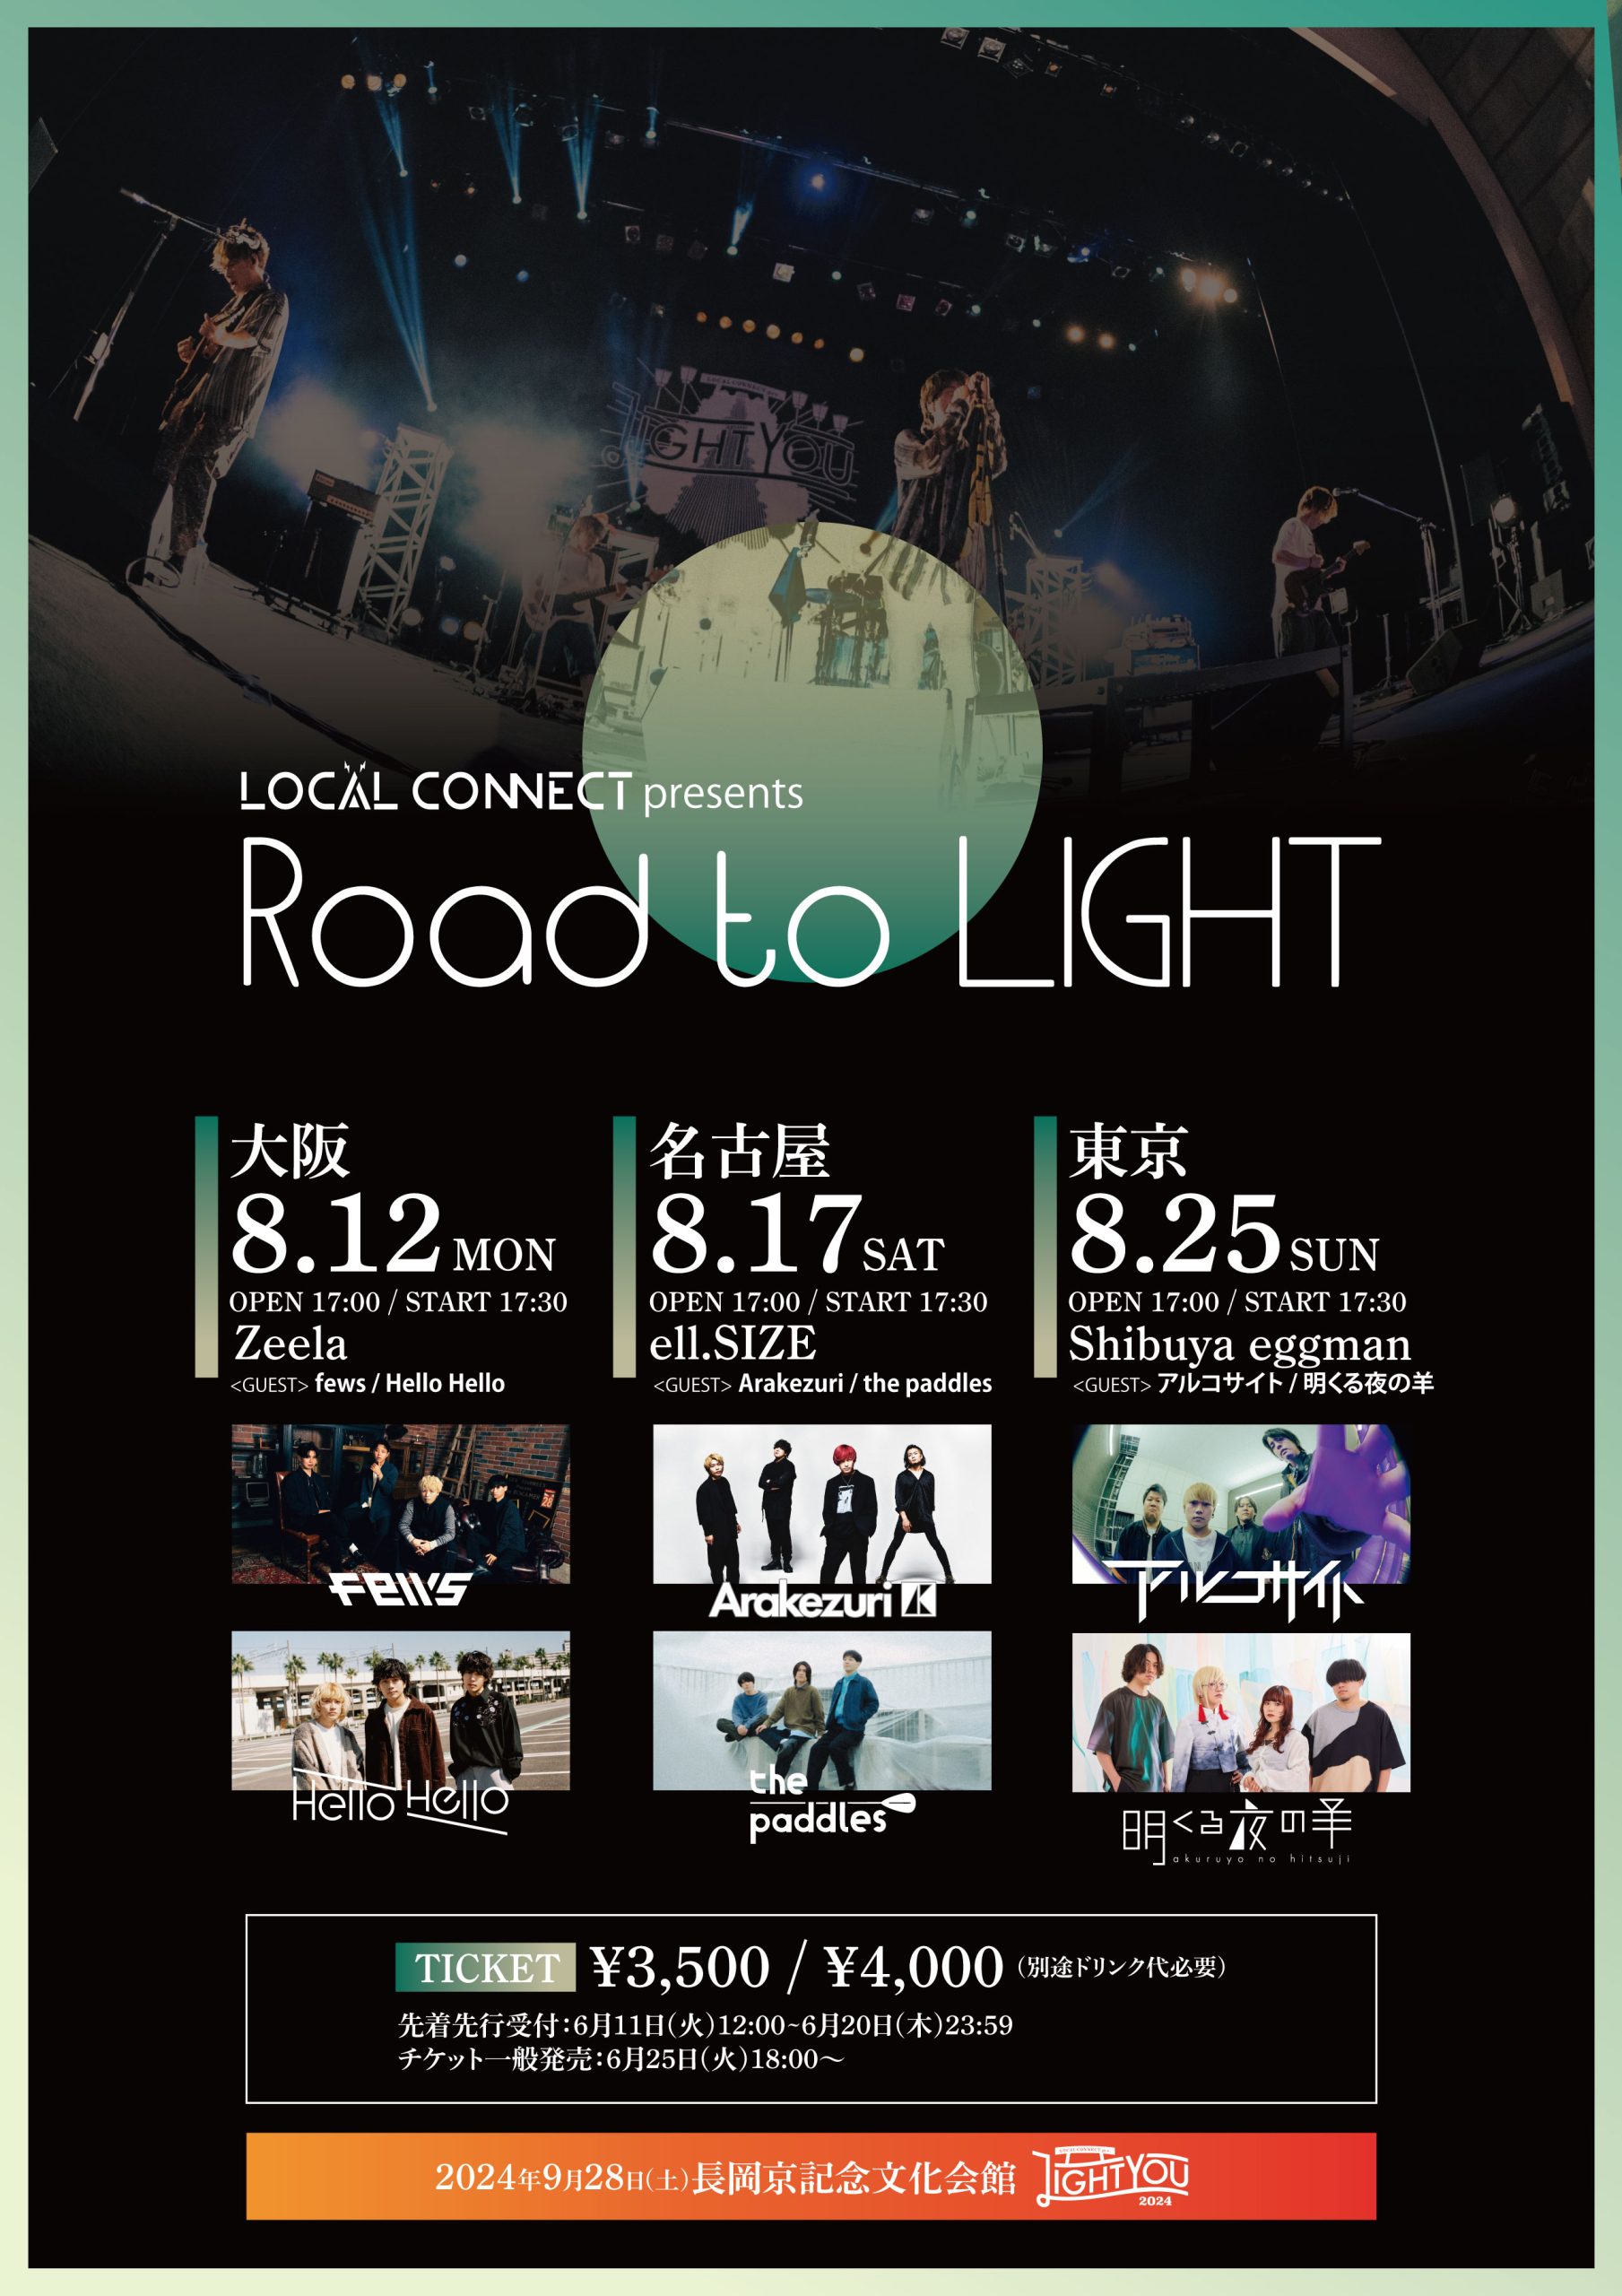 LOCAL CONNECT pre. “Road to LIGHT”